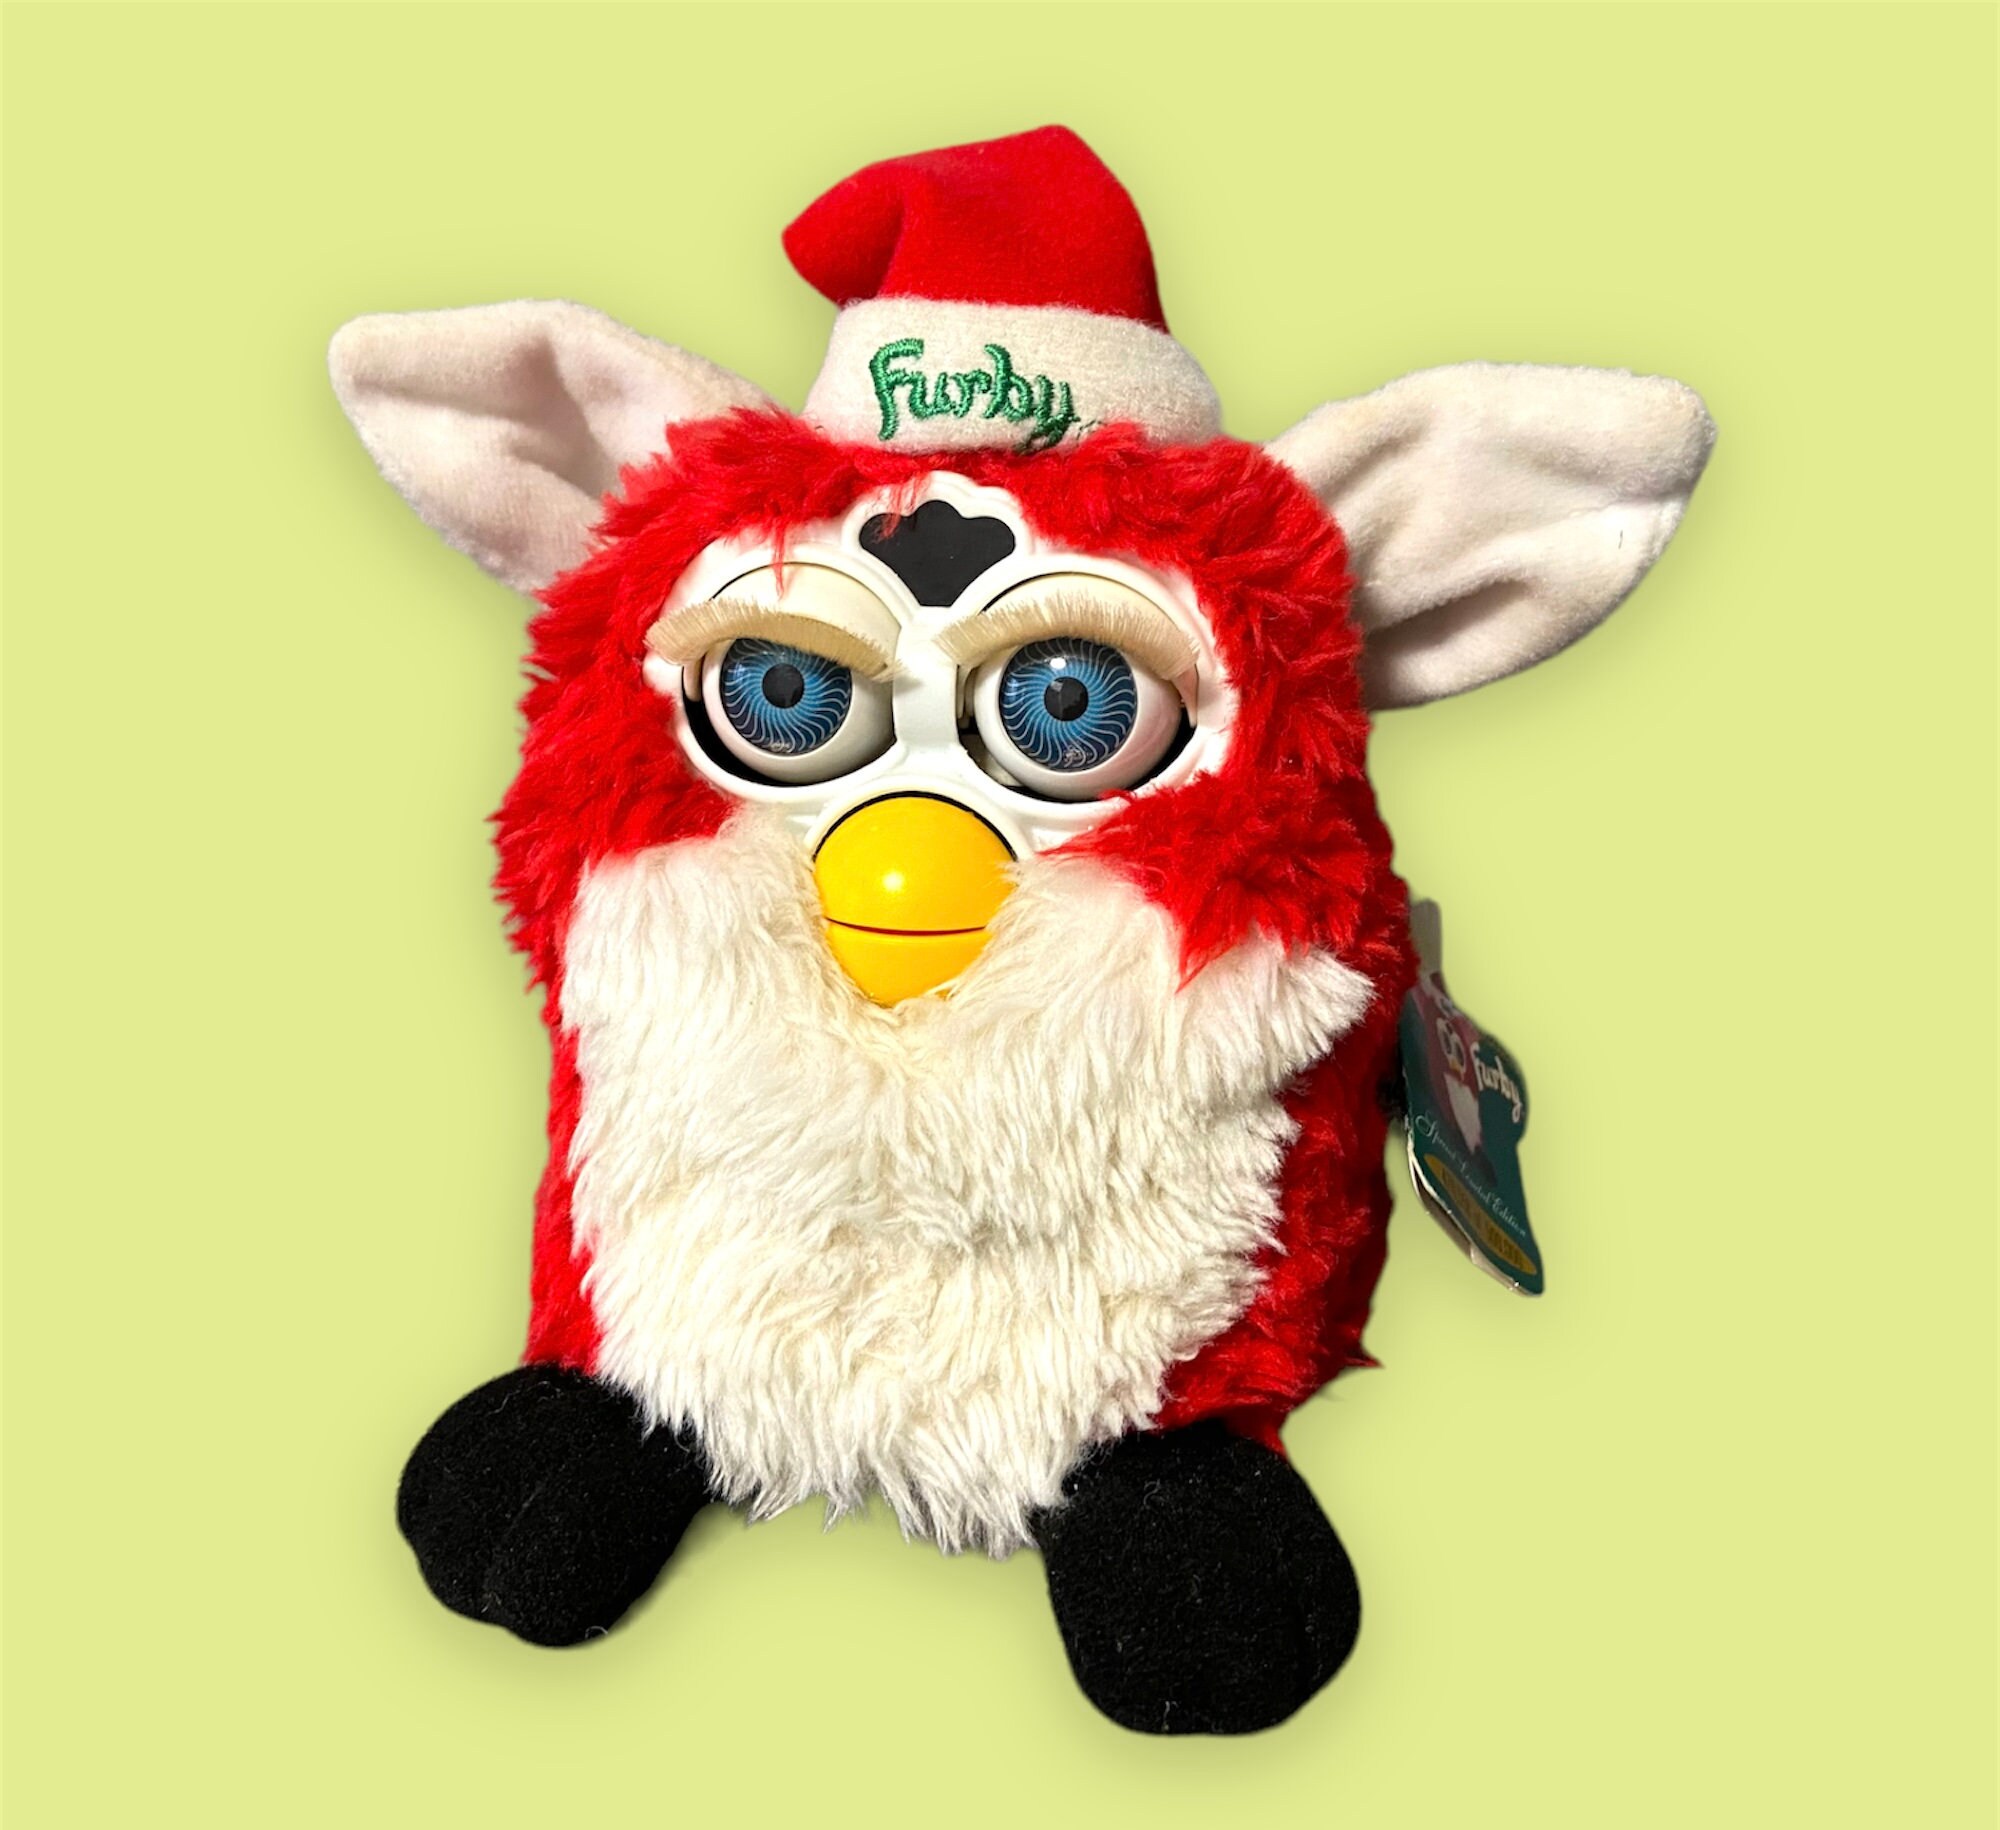 Vintage Furby Red and White Special Limited Edition Christmas photo